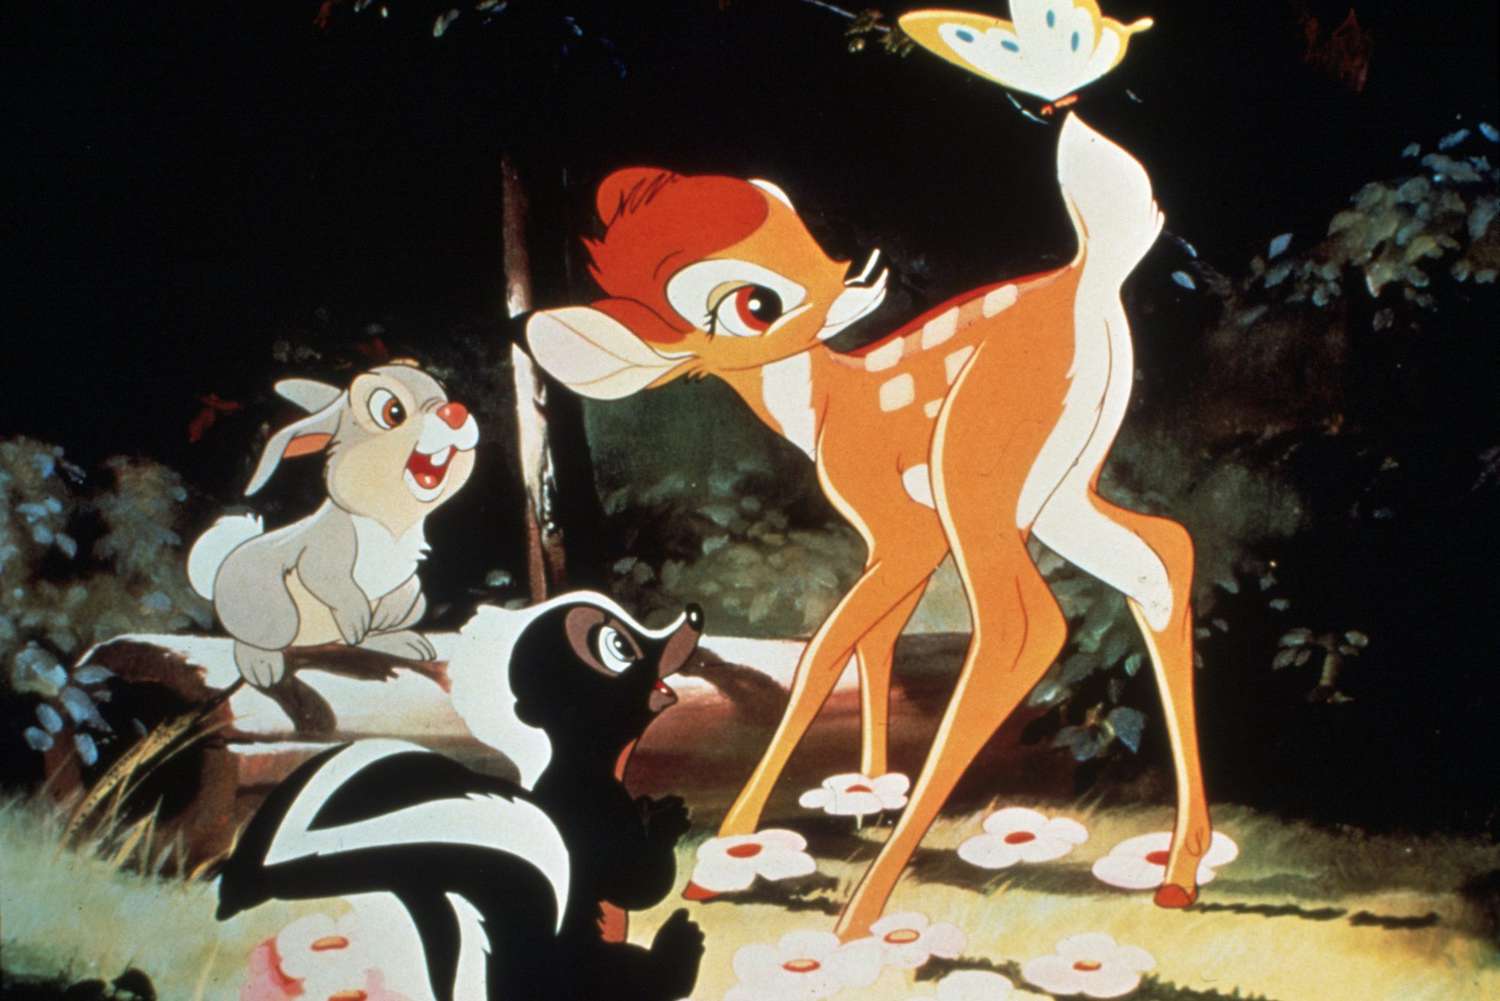 Editorial use only Mandatory Credit: Photo by GTV Archive/Shutterstock (390893gc) FILM STILLS OF 'BAMBI' WITH 1942, BAMBI, DAVID HAND IN 1942 VARIOUS